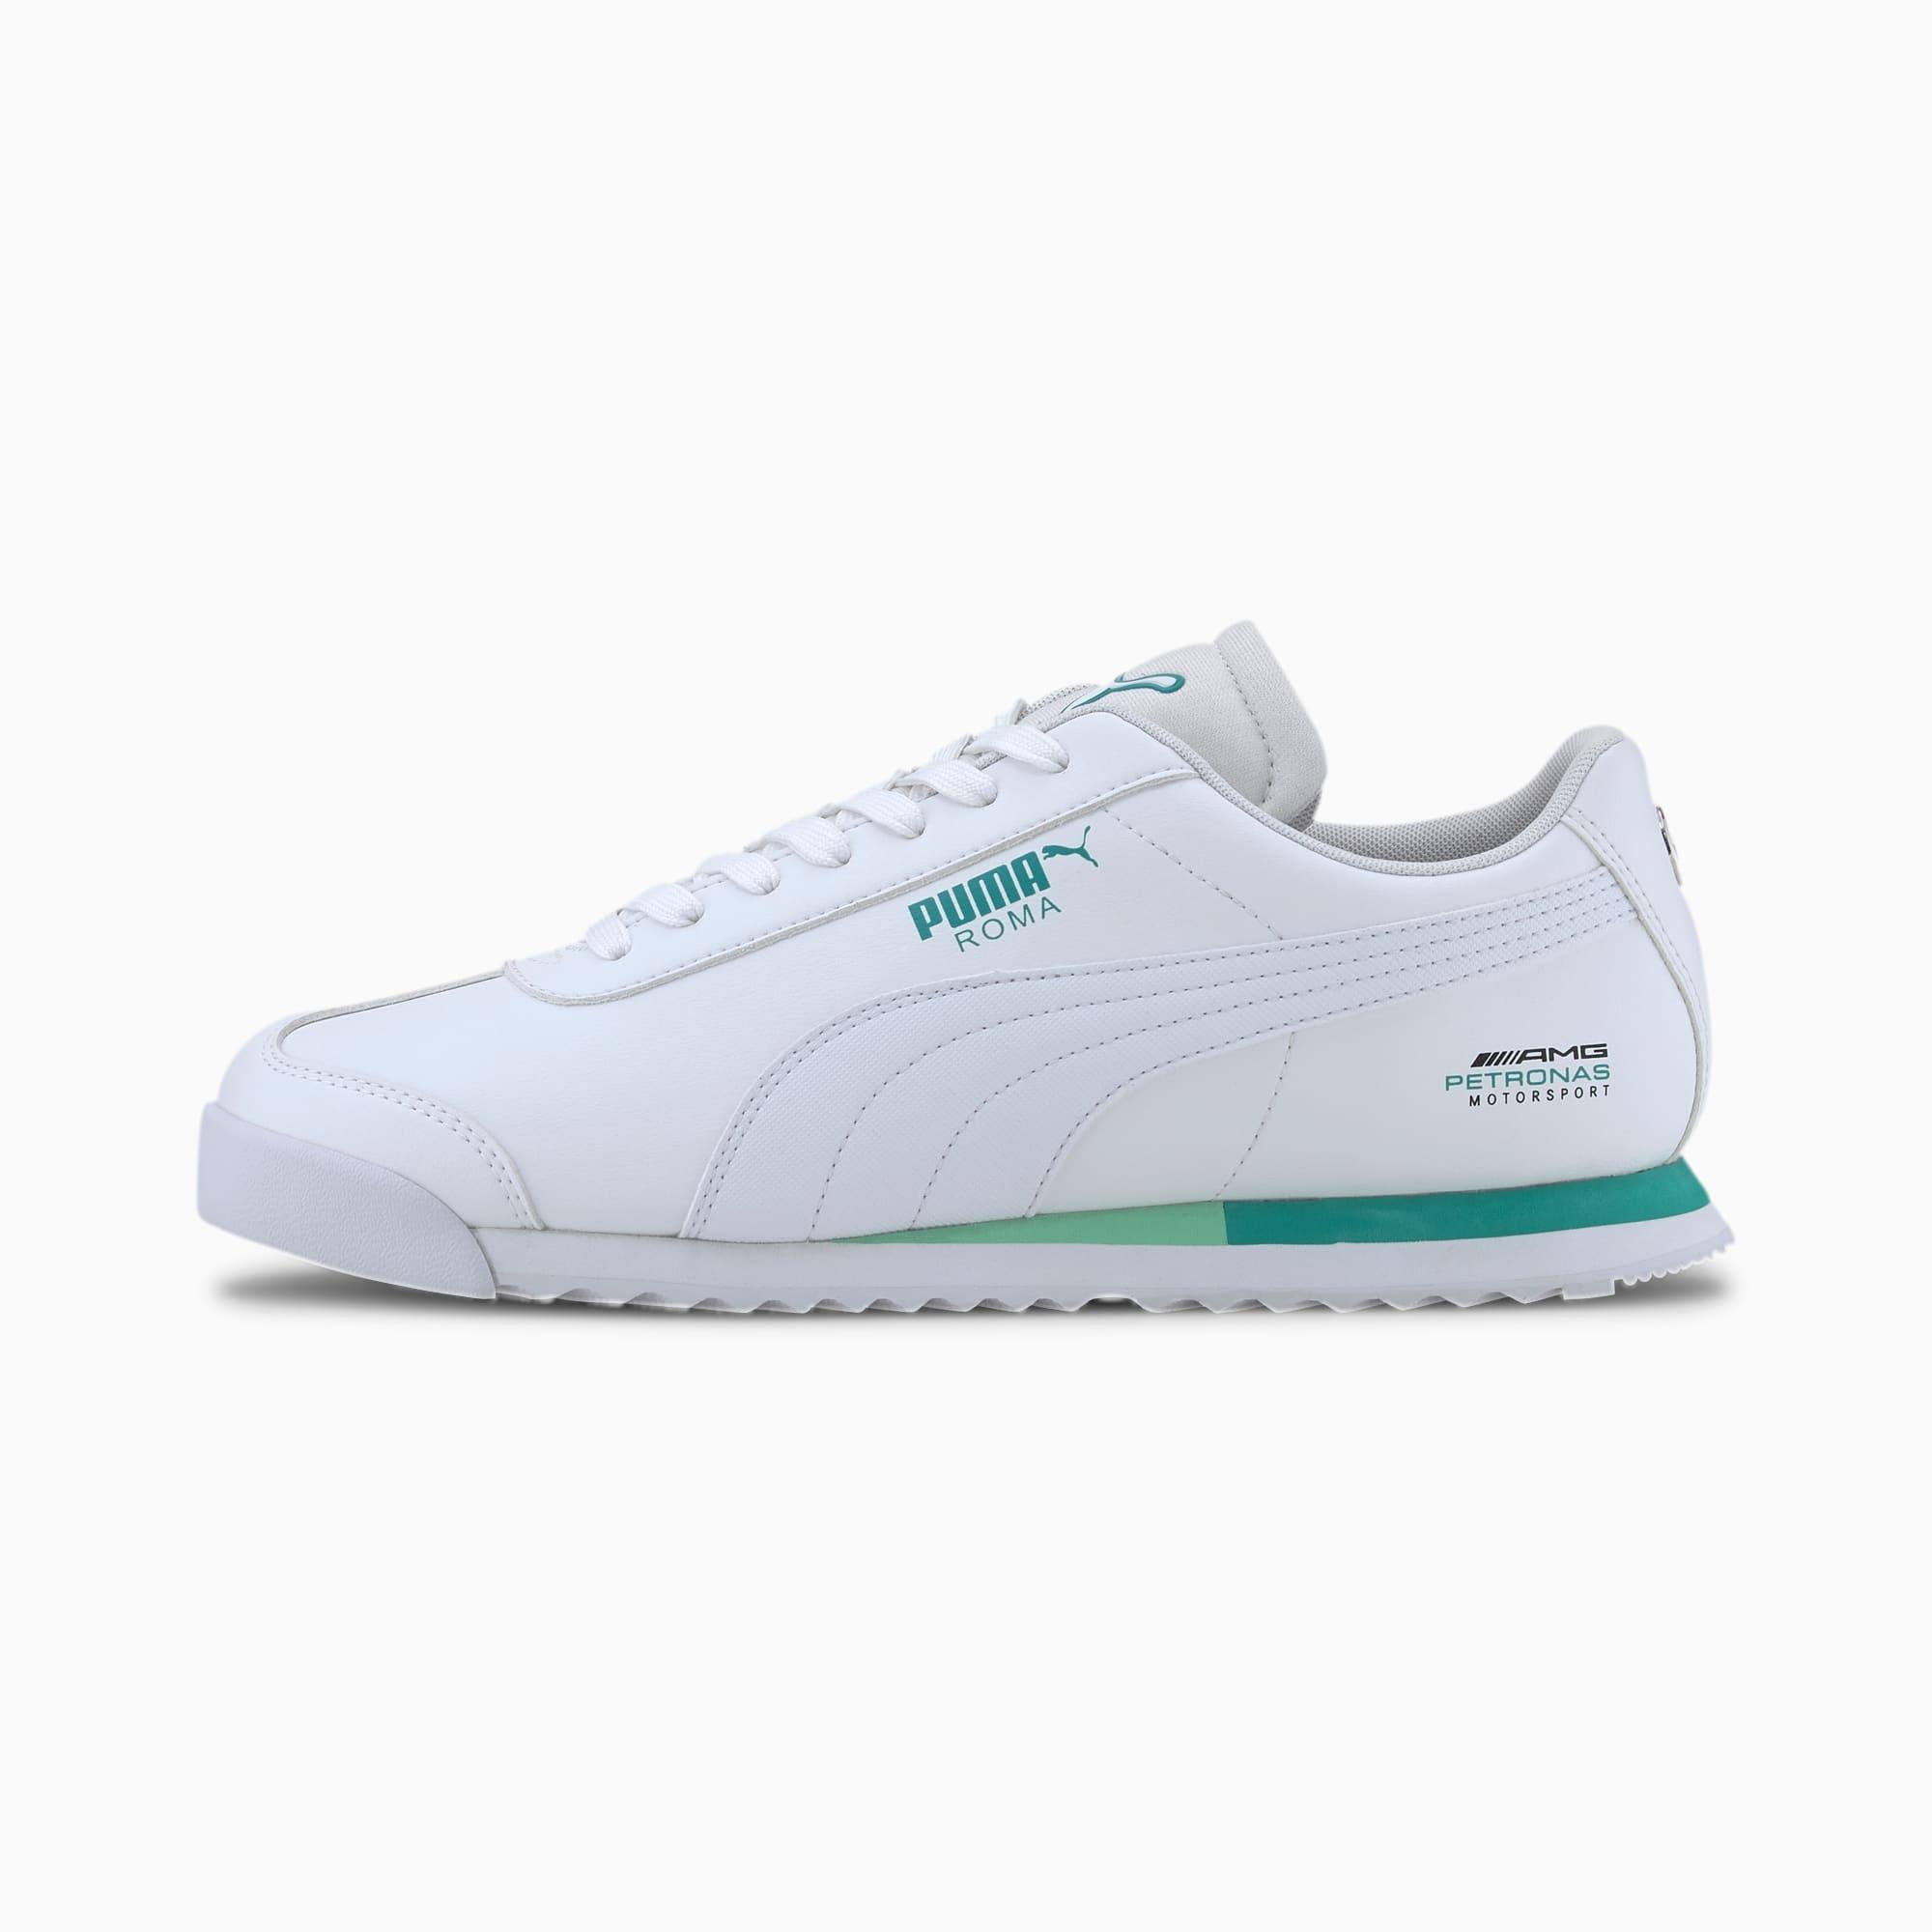 PUMA Synthetic Mercedes Amg Petronas Roma Sneakers in White for Men - Lyst